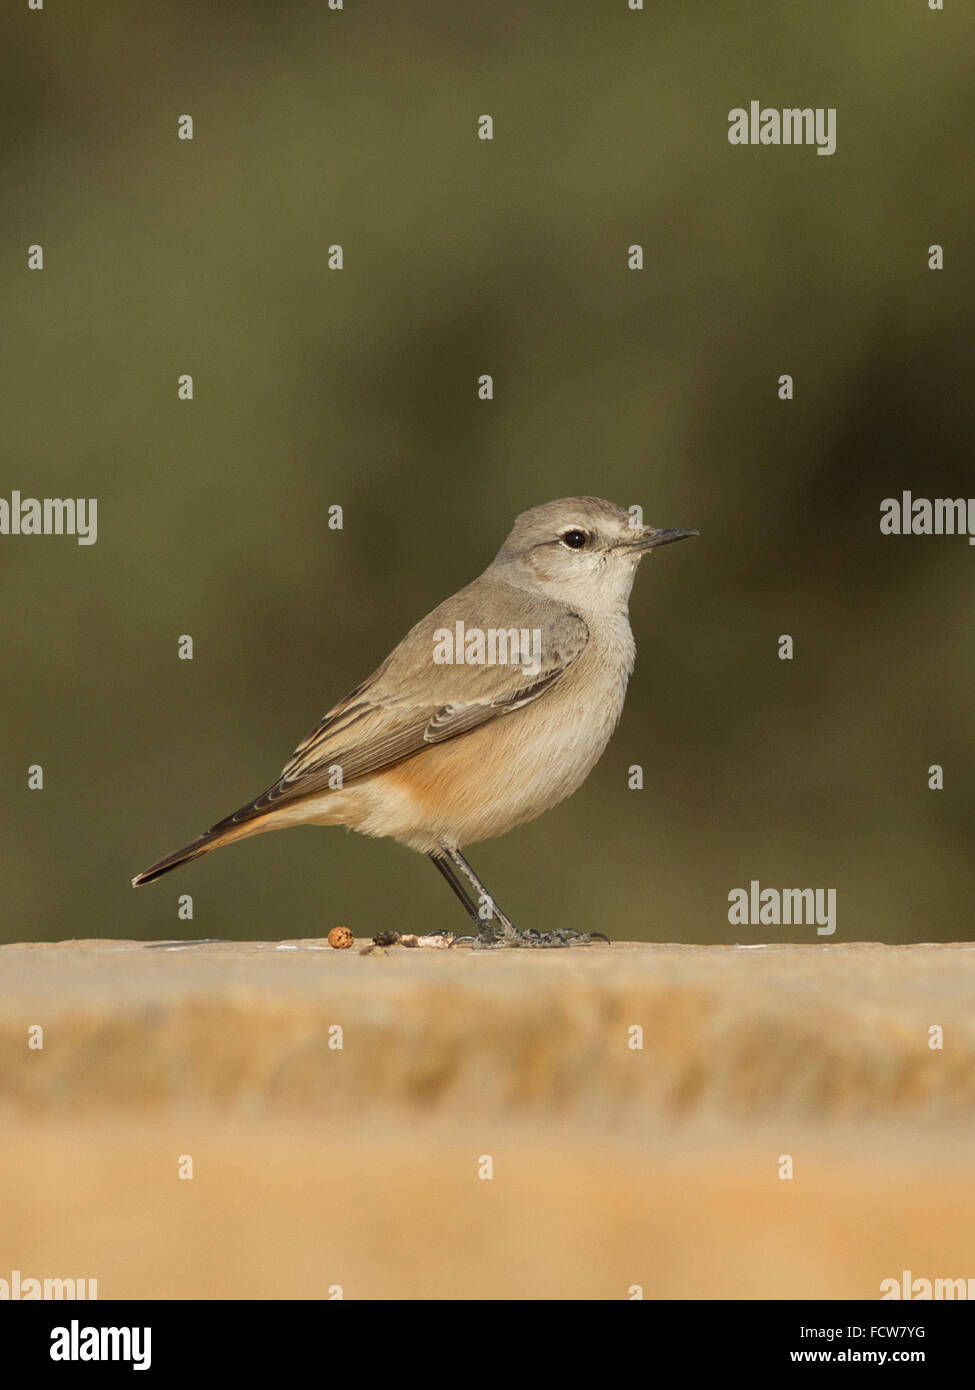 red-tailed wheatear (Oenanthe chrysopygia) at Rajasthan, India Stock Photo